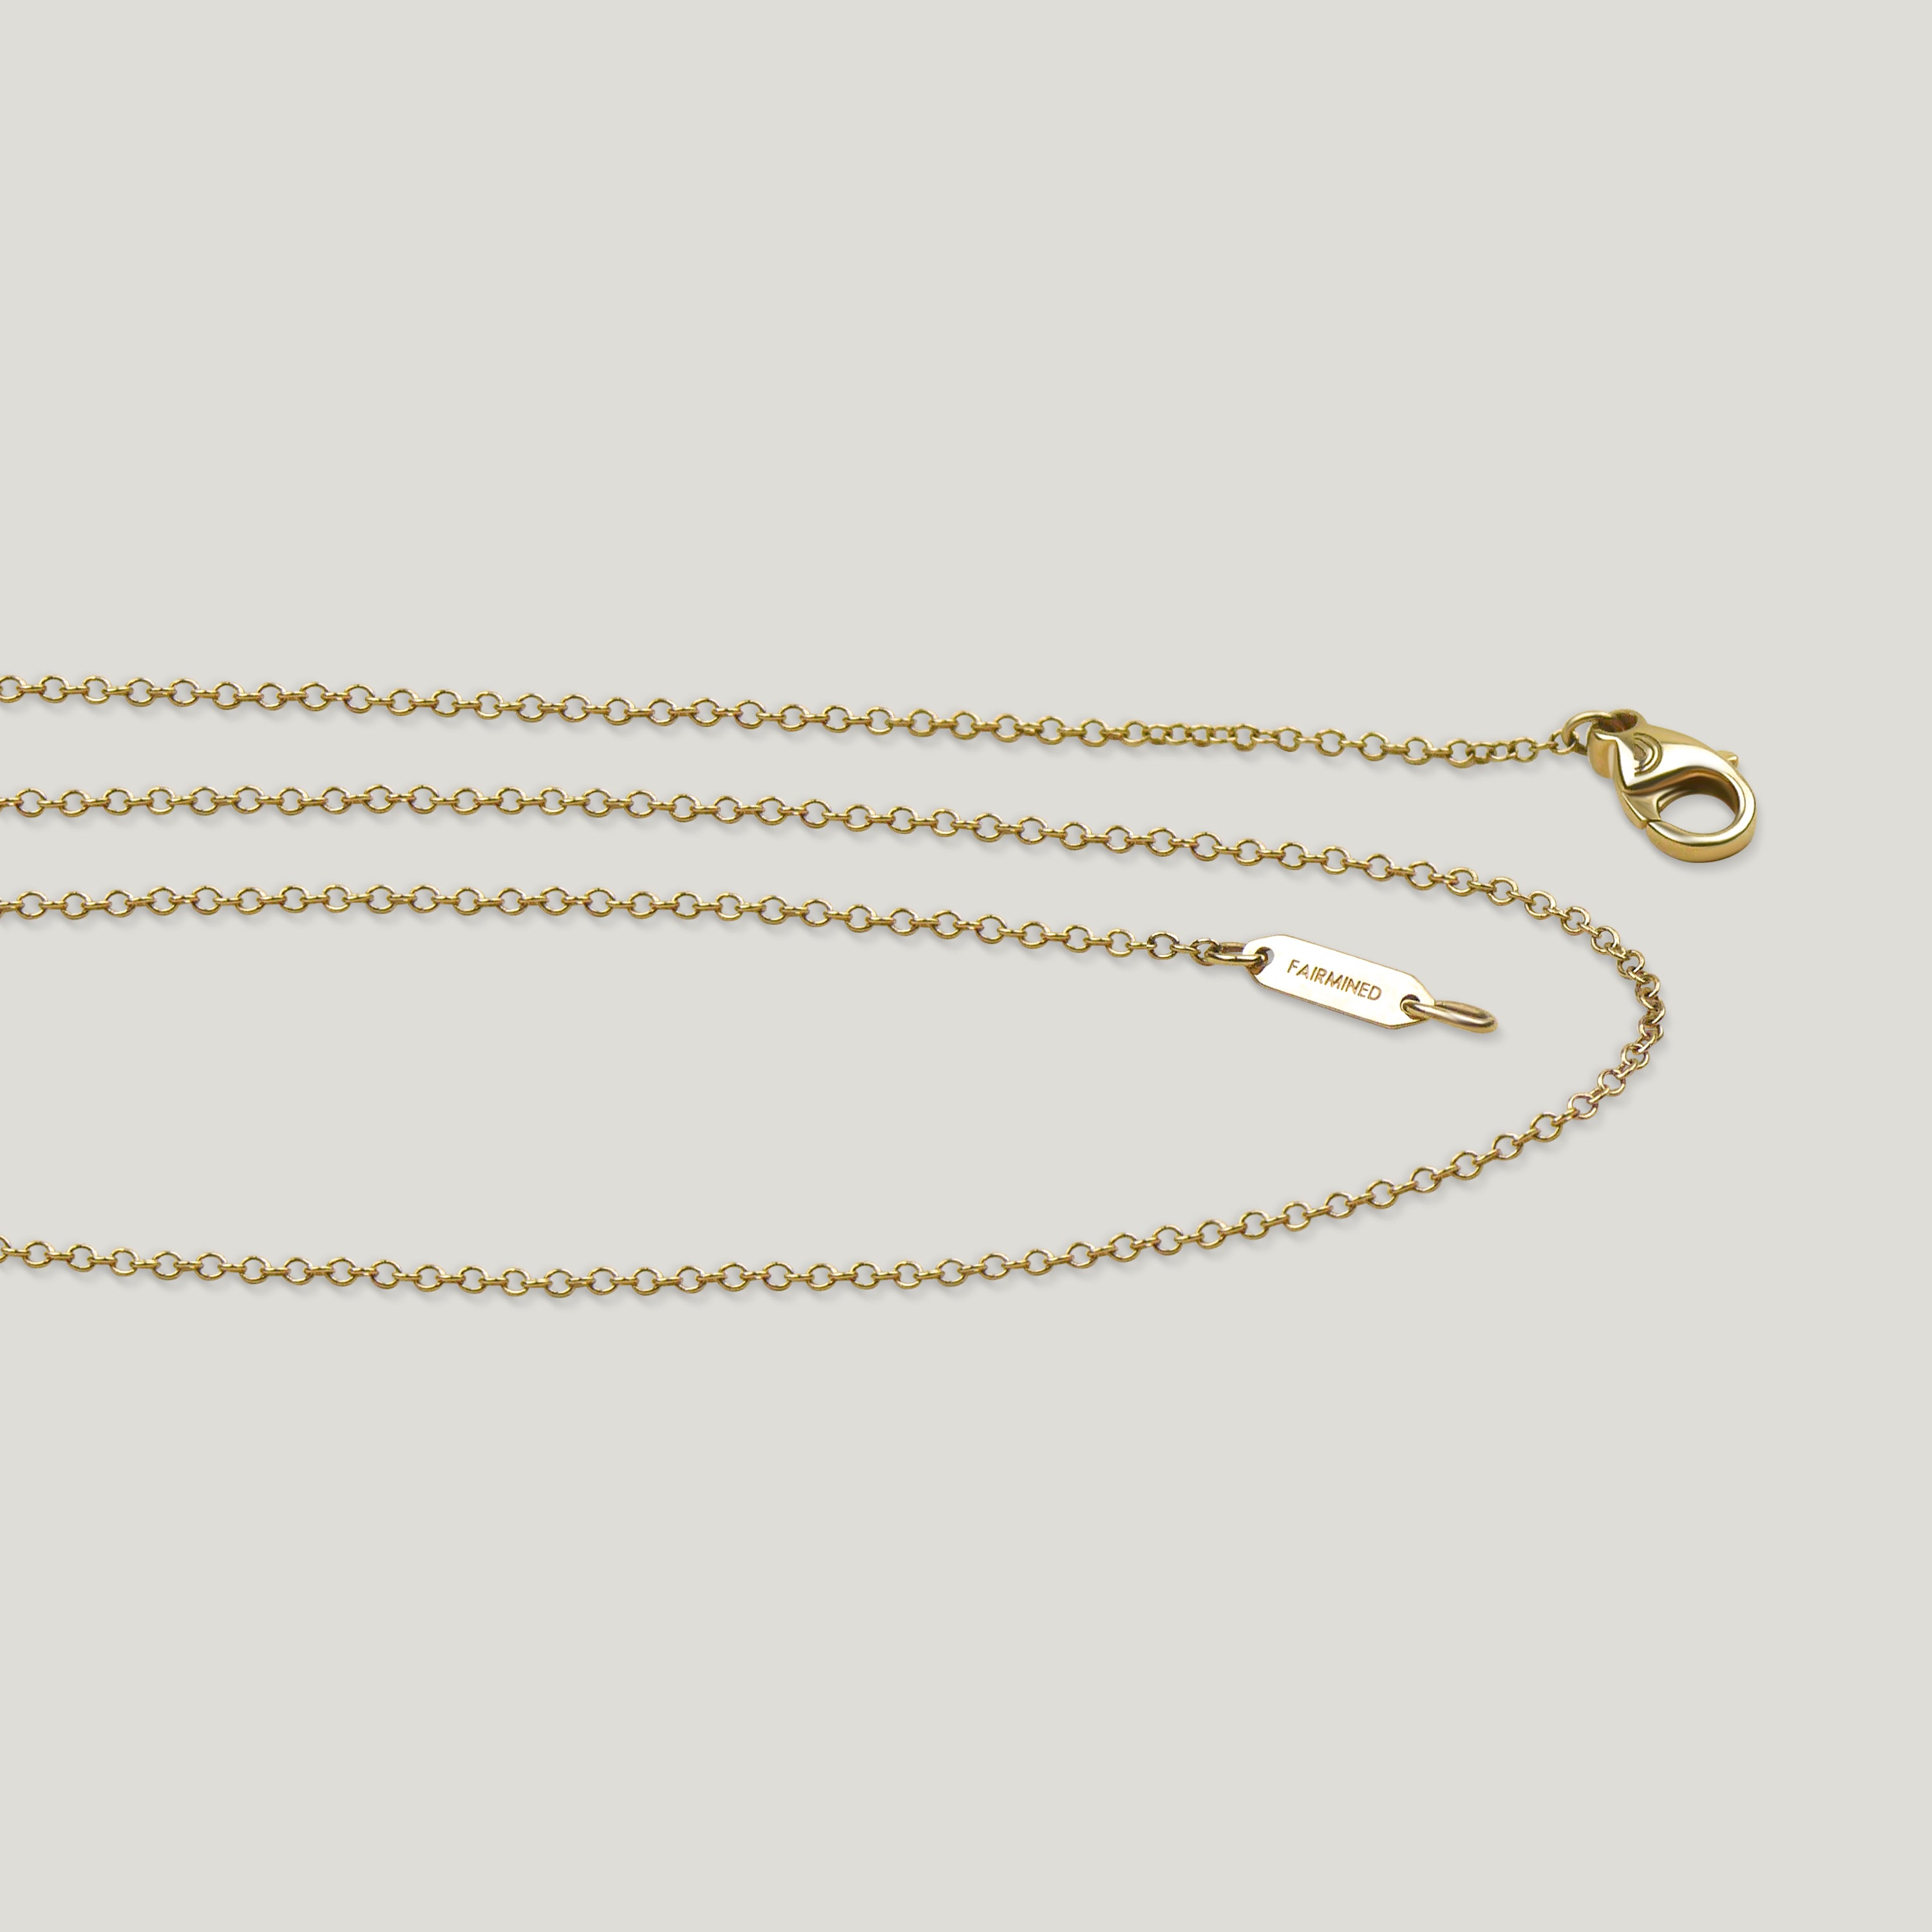 Fairmined Gold Strand Cable Chain and Clasp